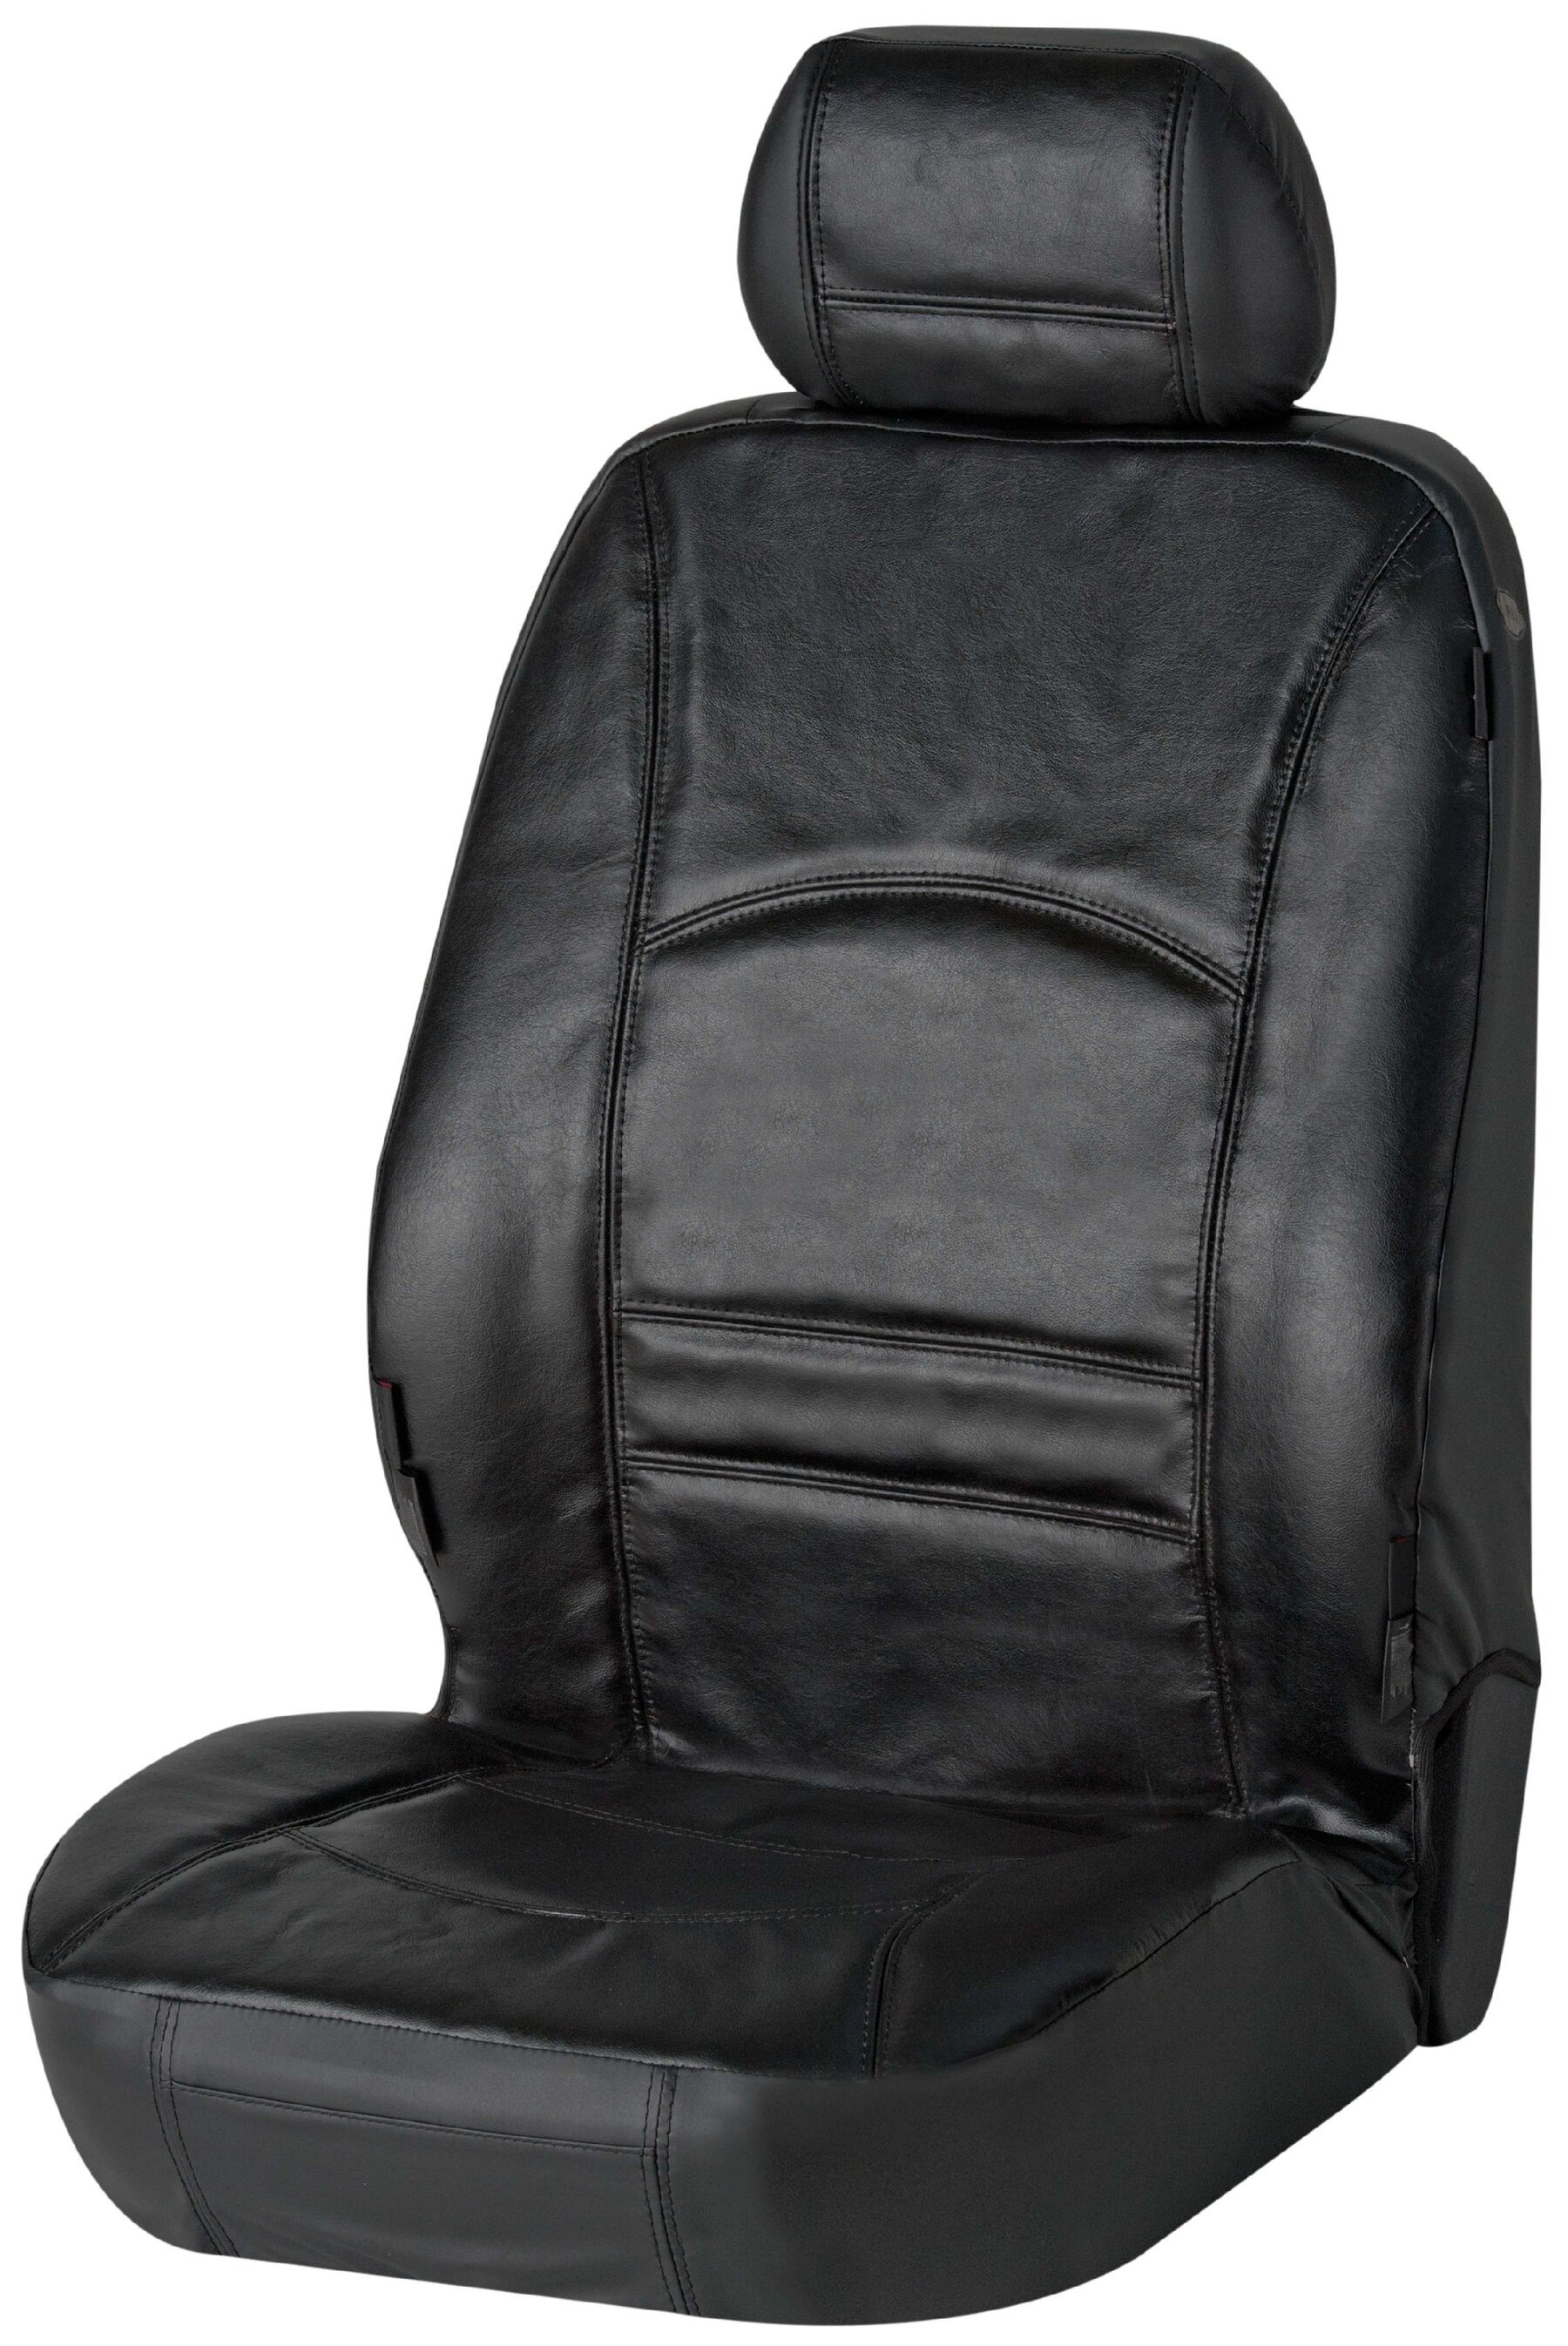 Car Seat cover Ranger made of real leather black